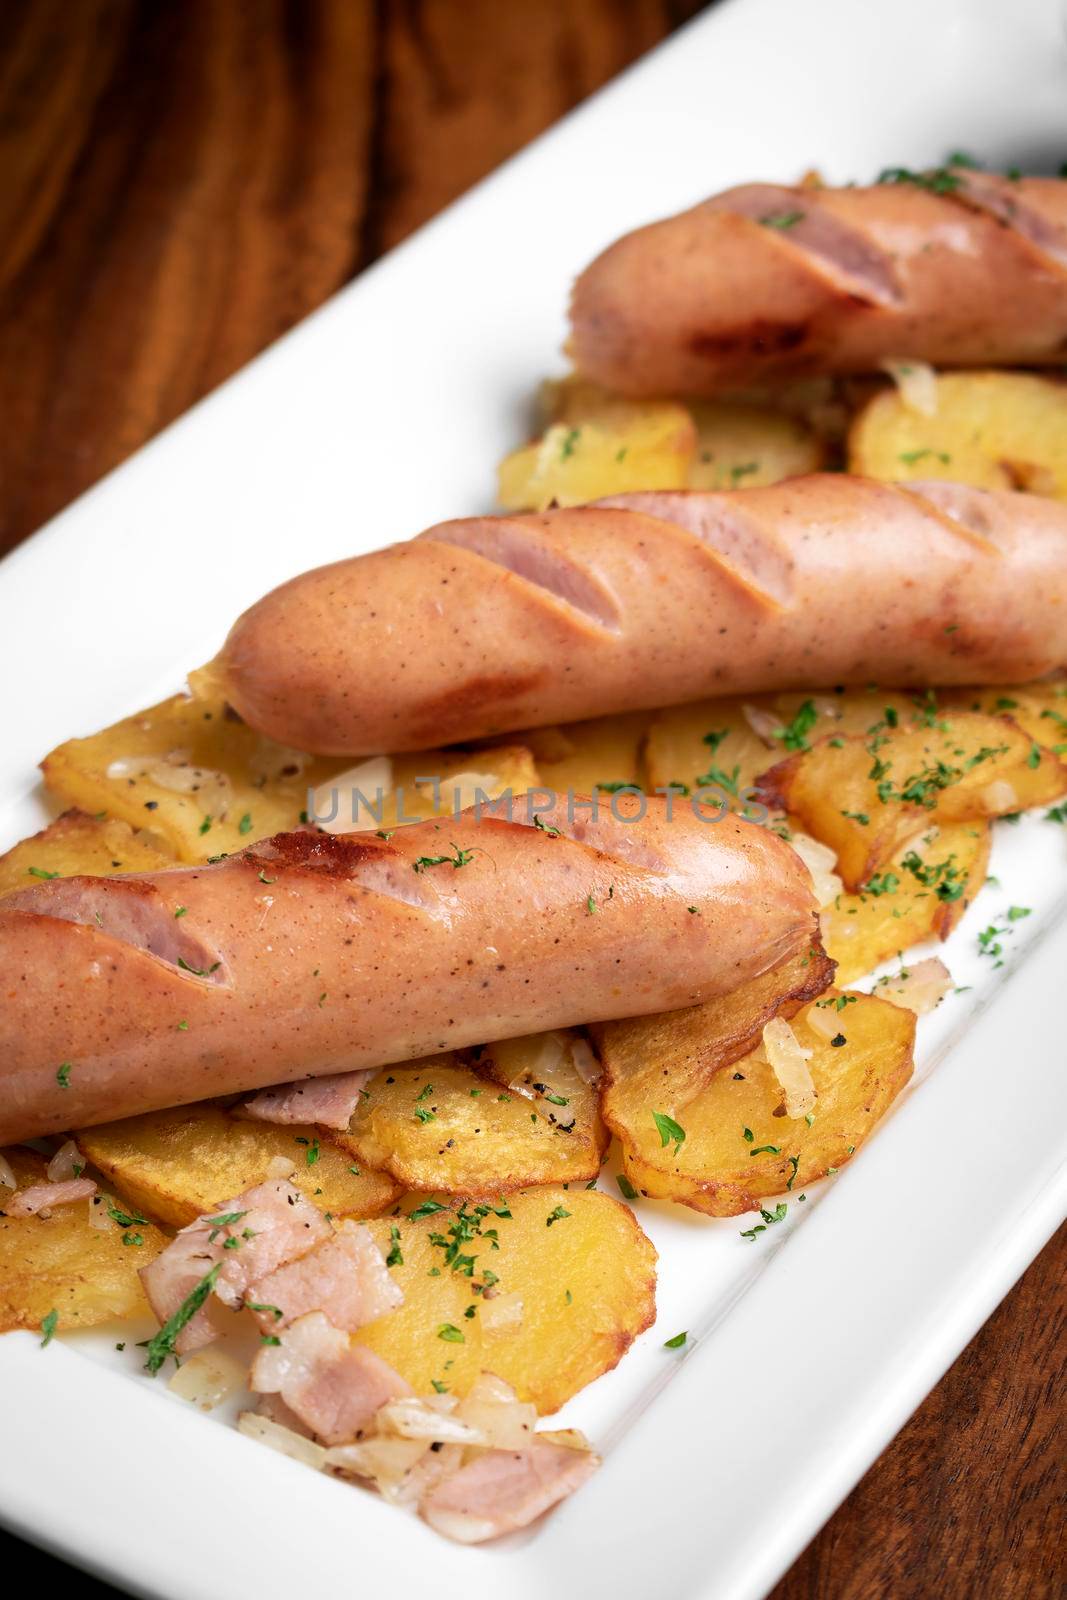 german cheese sausages with fried potato and mustard by jackmalipan